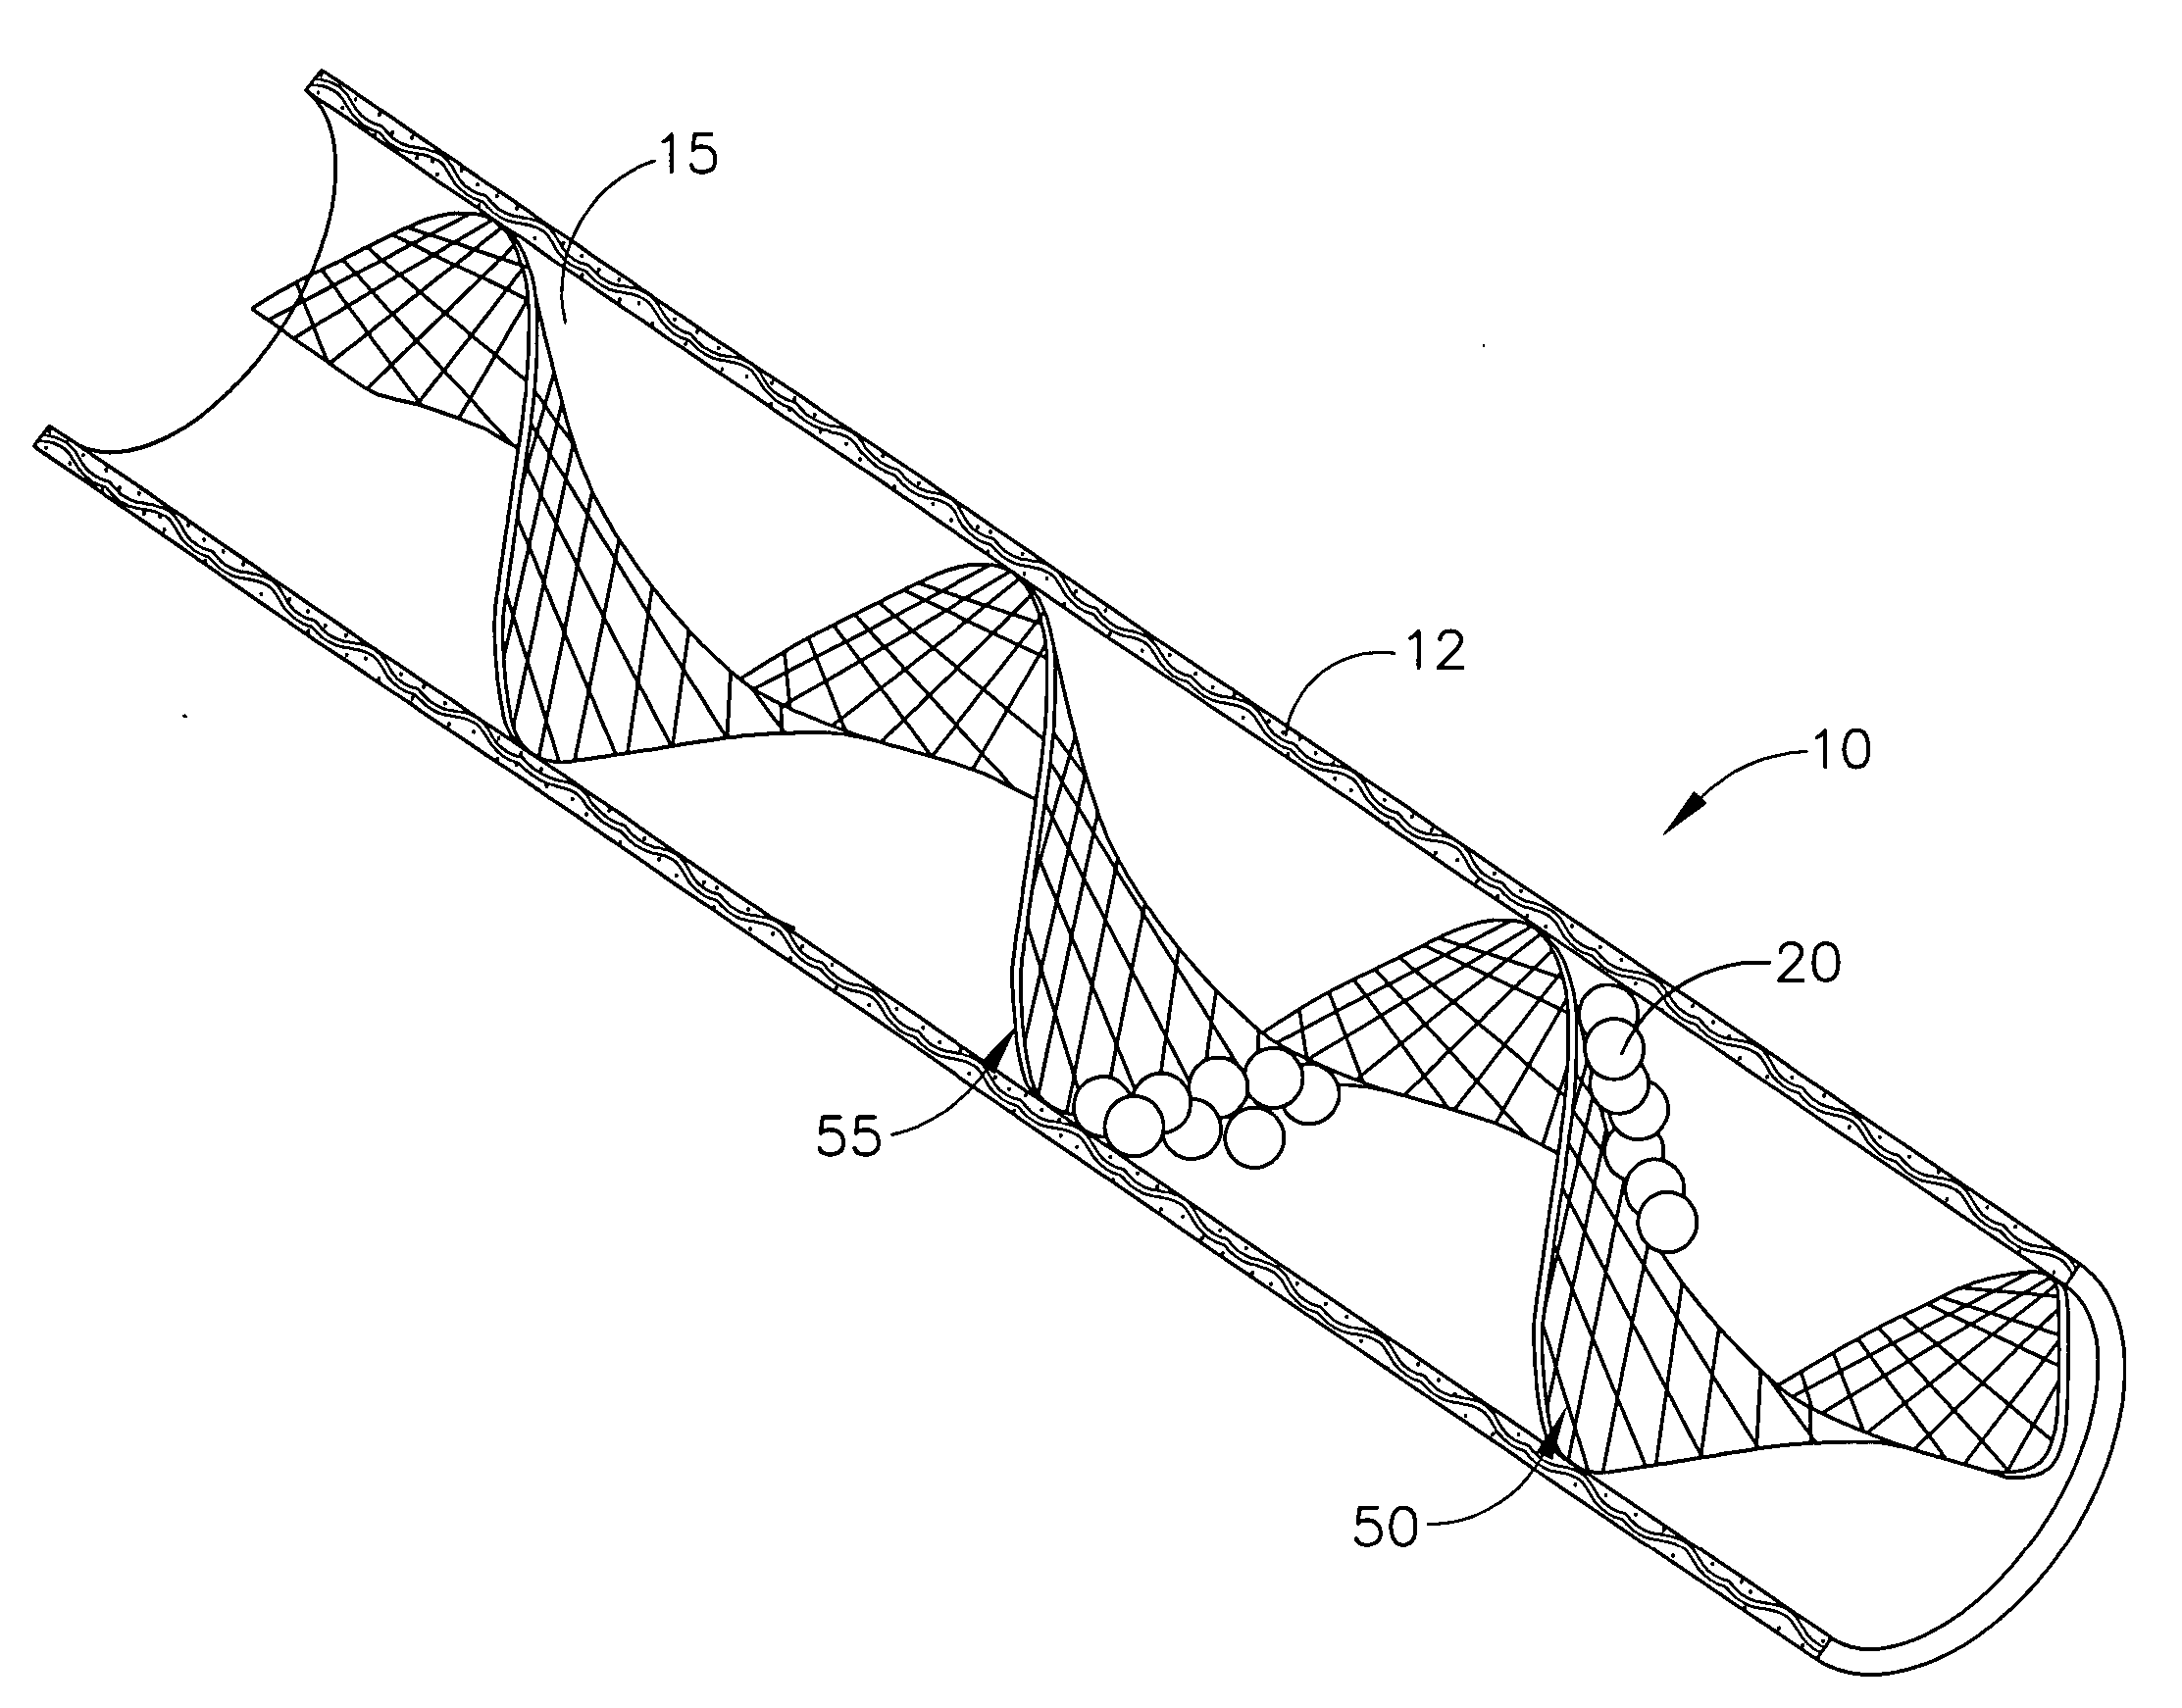 Method for filtering blood in a vessel with helical elements